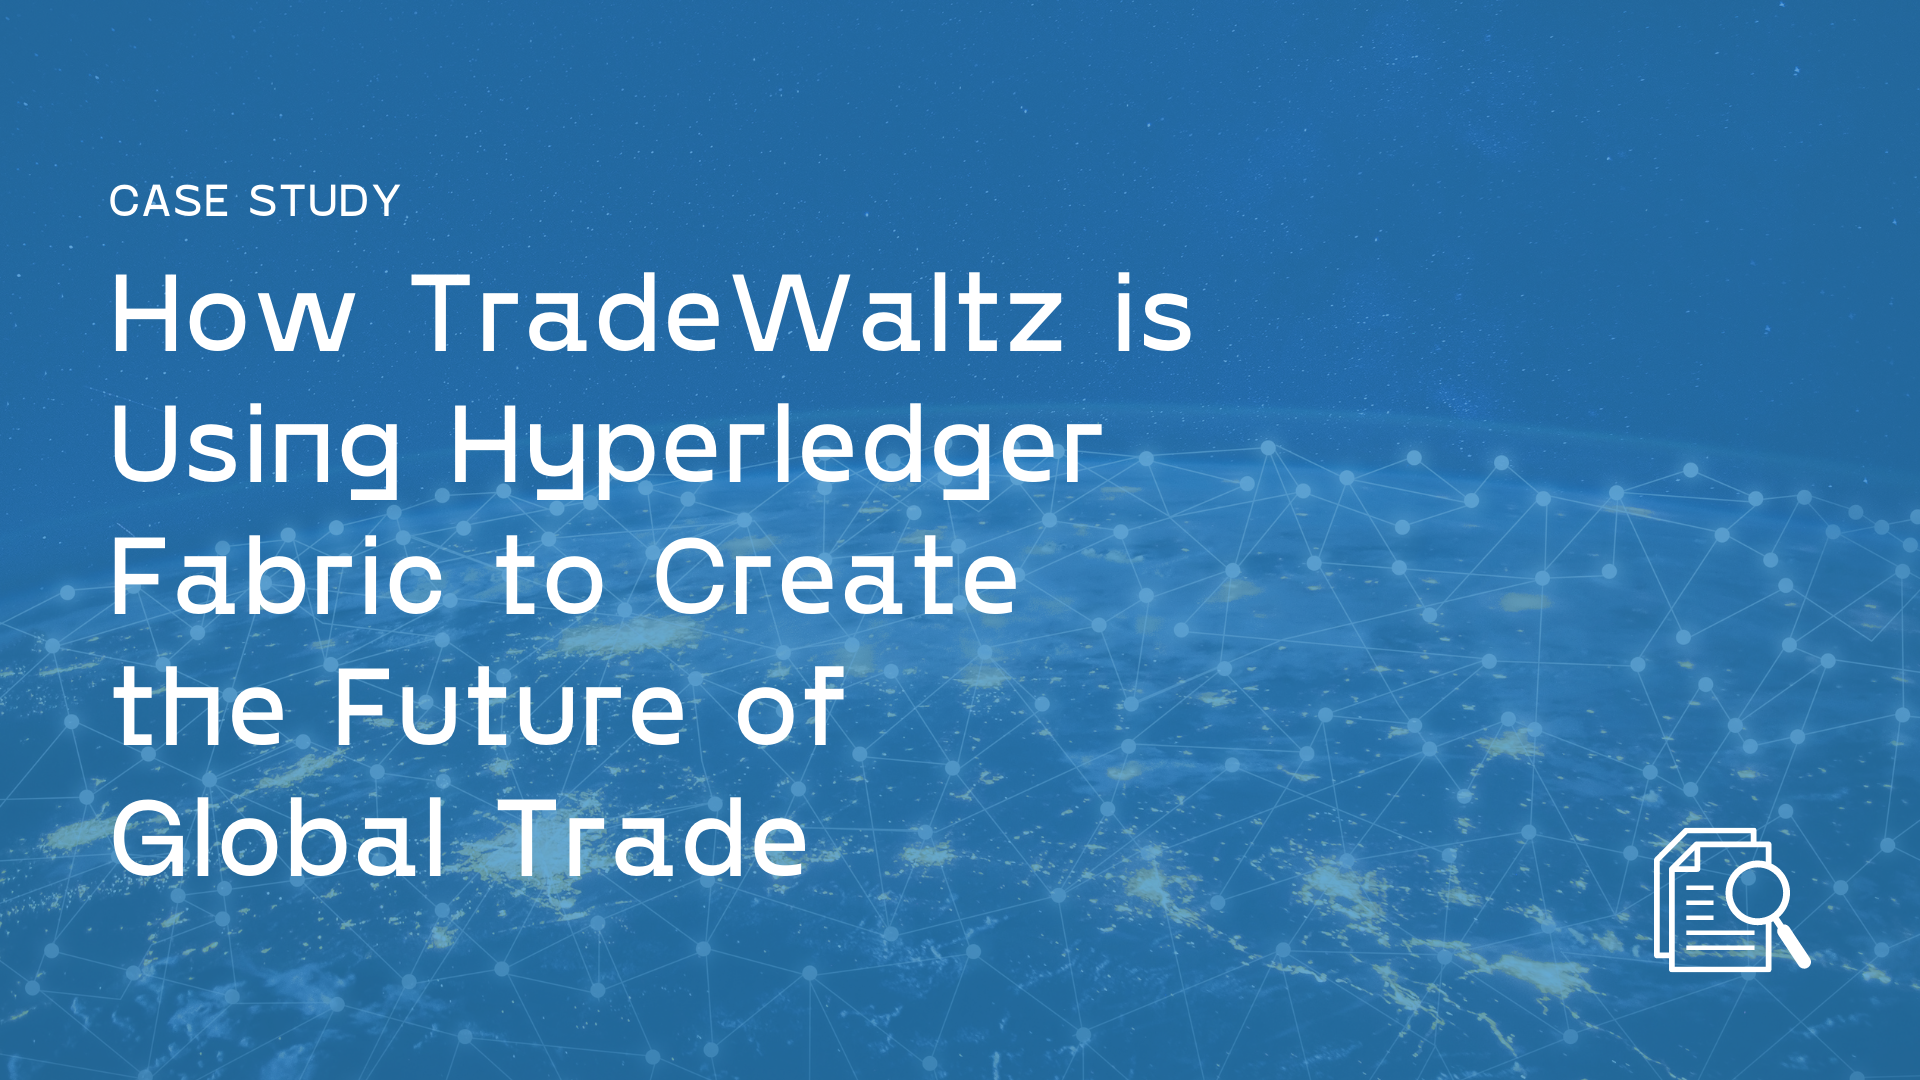 How TradeWaltz is Using Hyperledger Fabric to Create the Future of Global Trade (1)